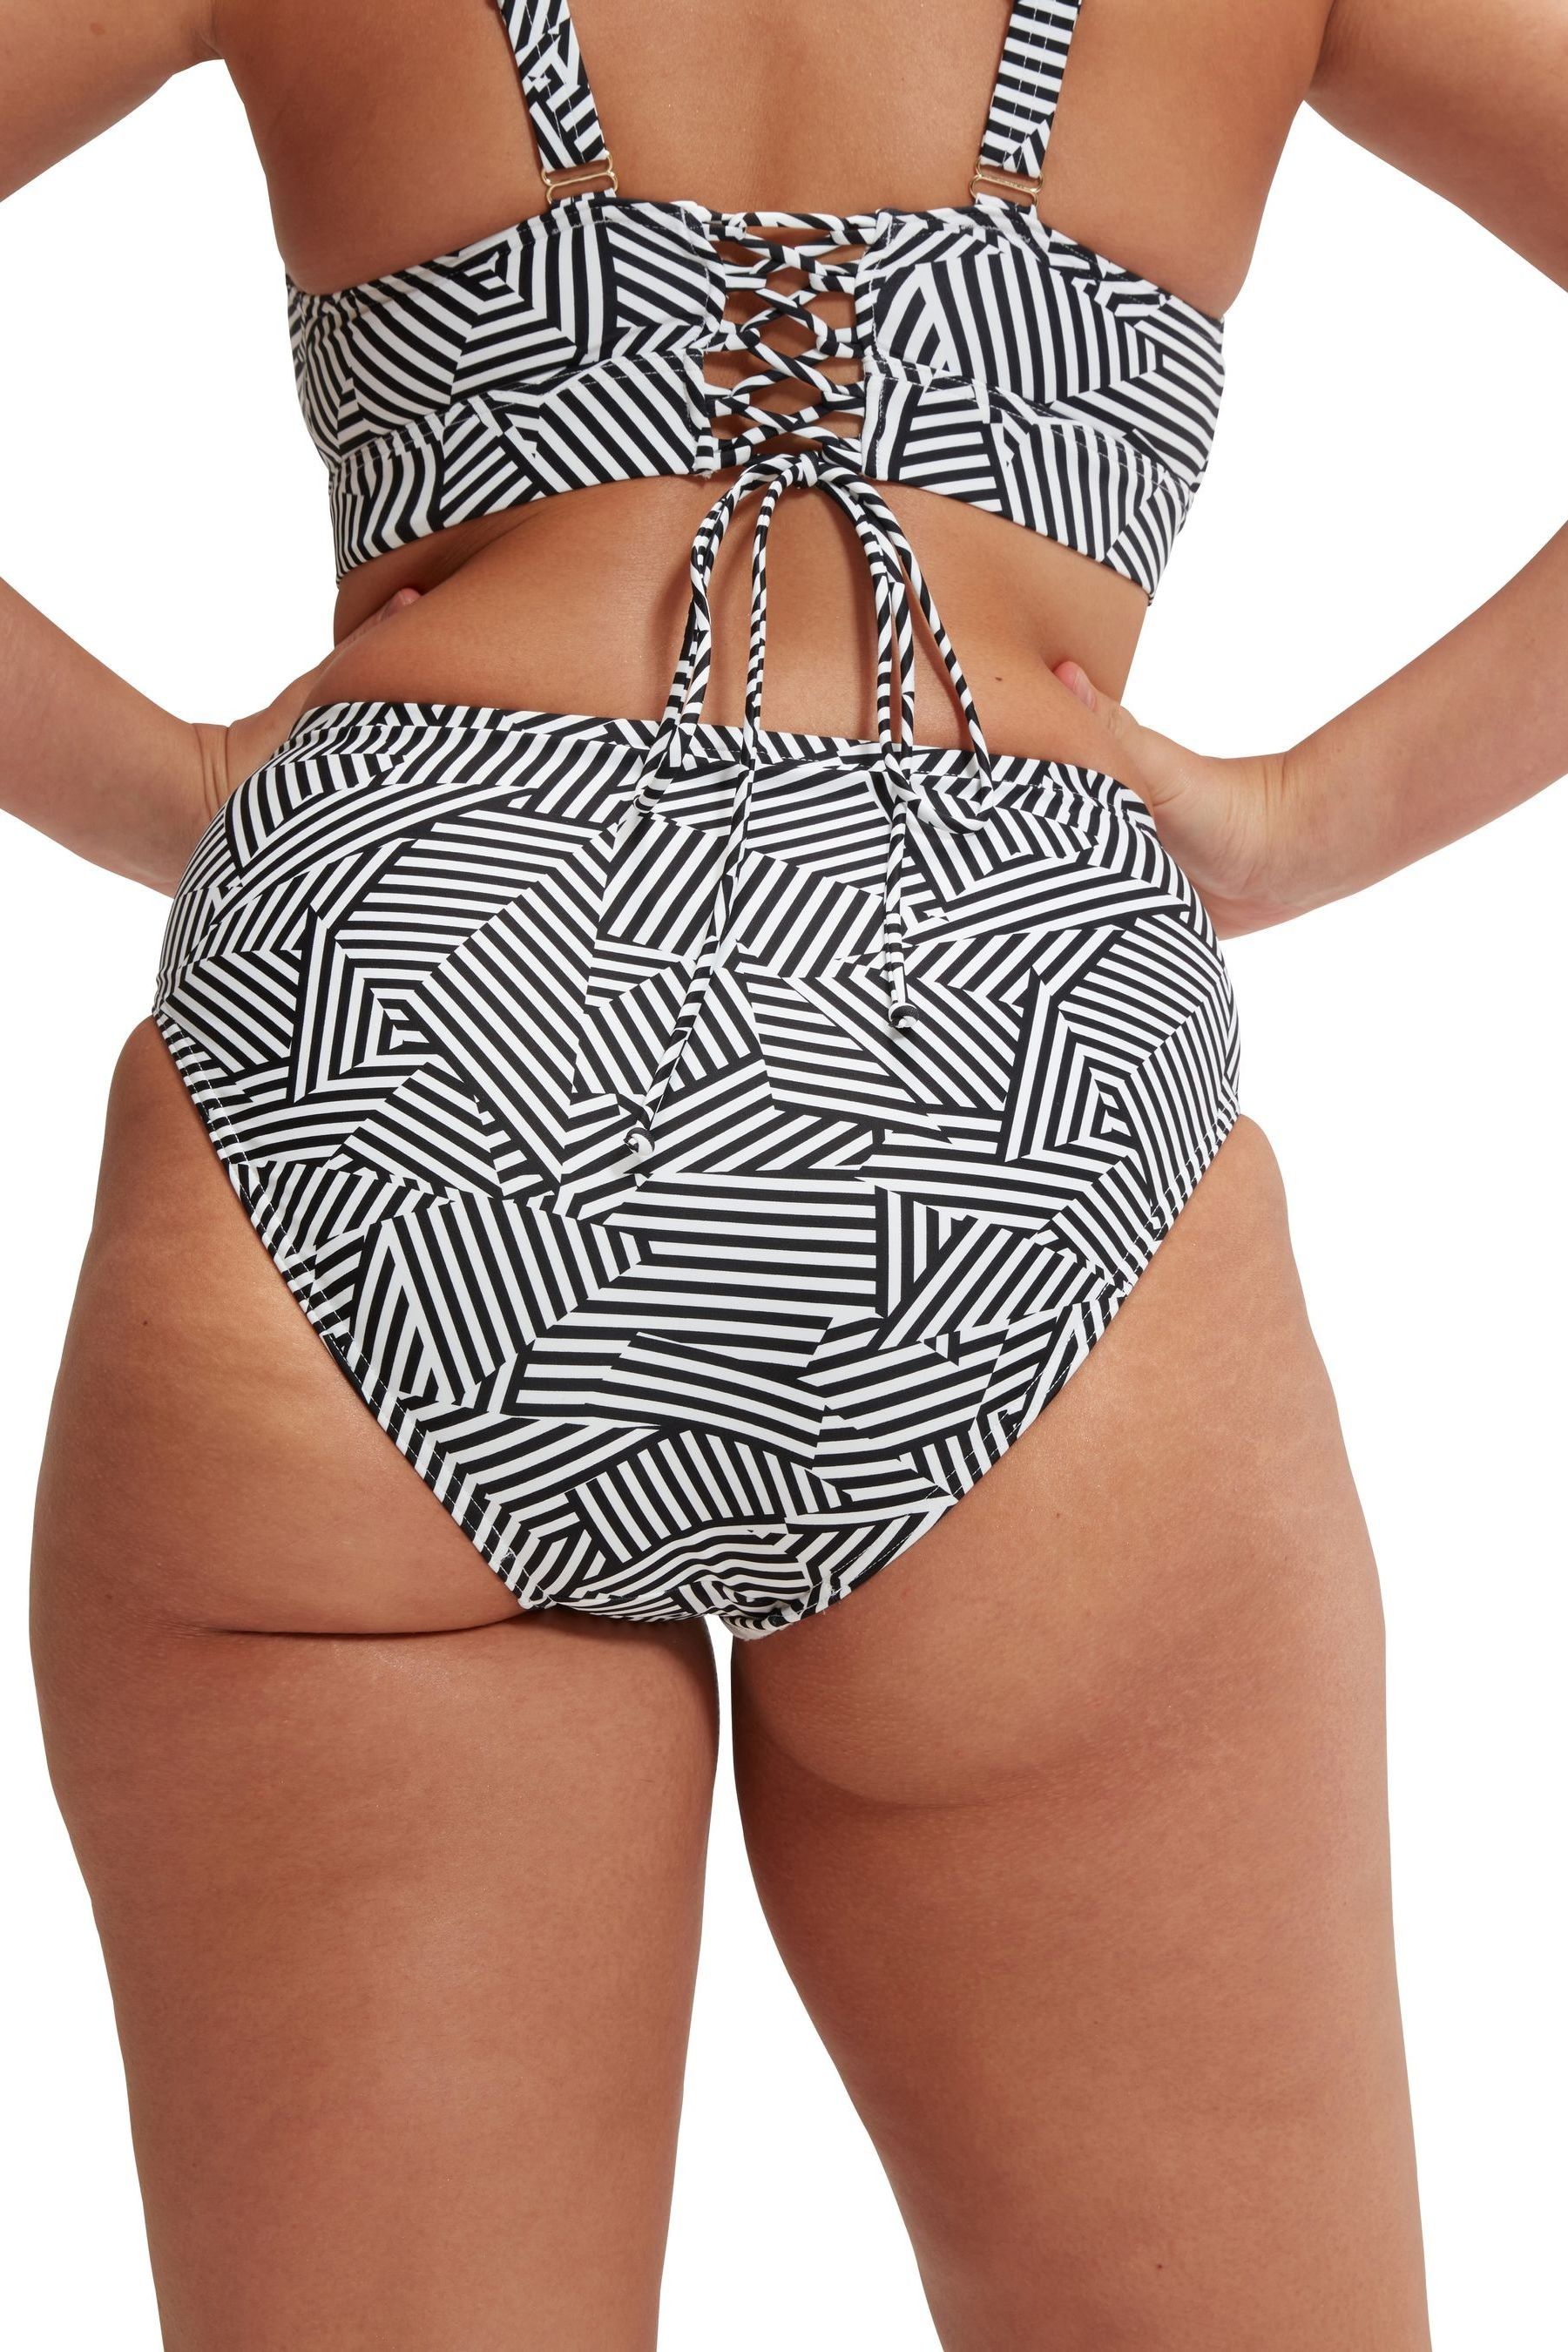 Buy Speedo Womens Shaping Printed High Waisted Black Briefs from